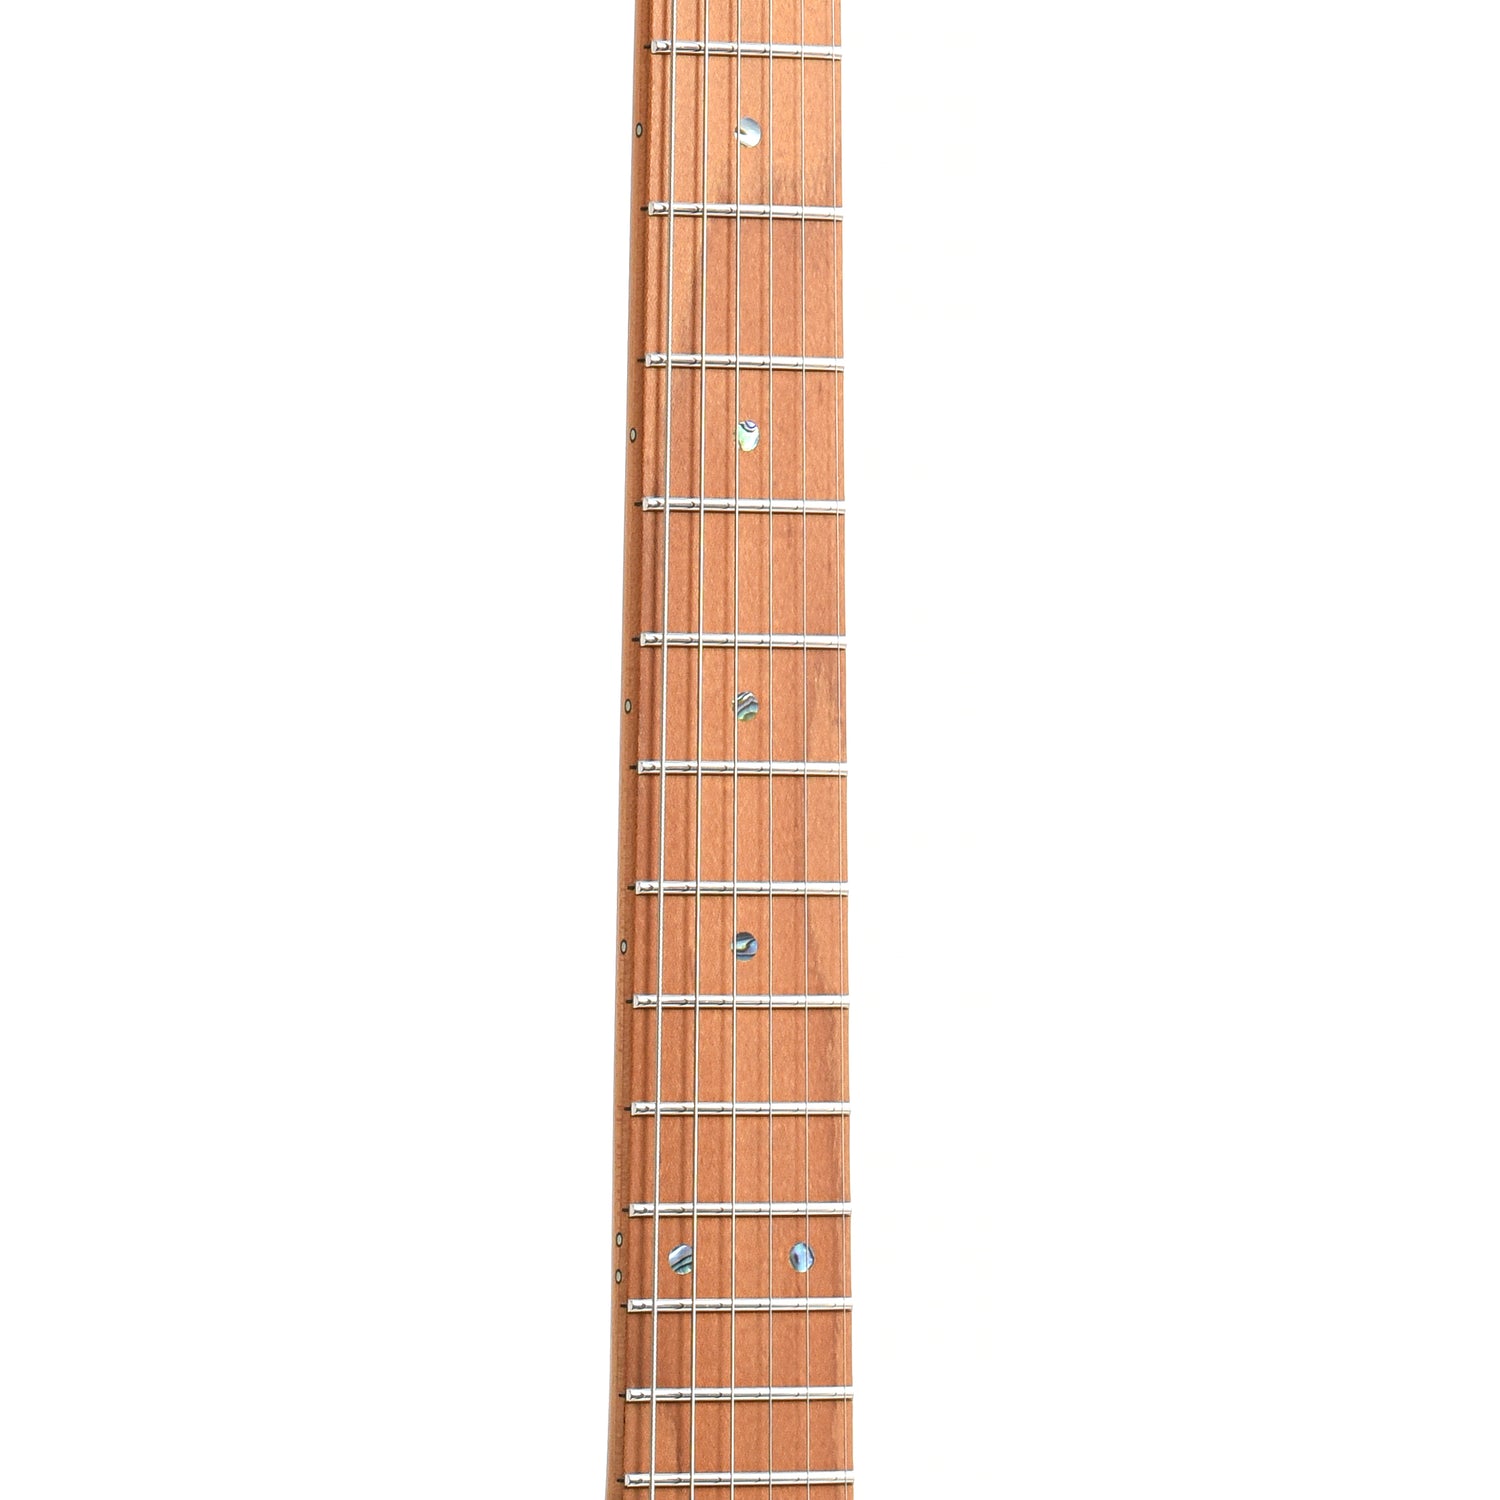 Image 6 of Ibanez Prestige Series AZS2200F Electric Guitar, Sunset Burst - SKU# AZS2200F-STB : Product Type Solid Body Electric Guitars : Elderly Instruments